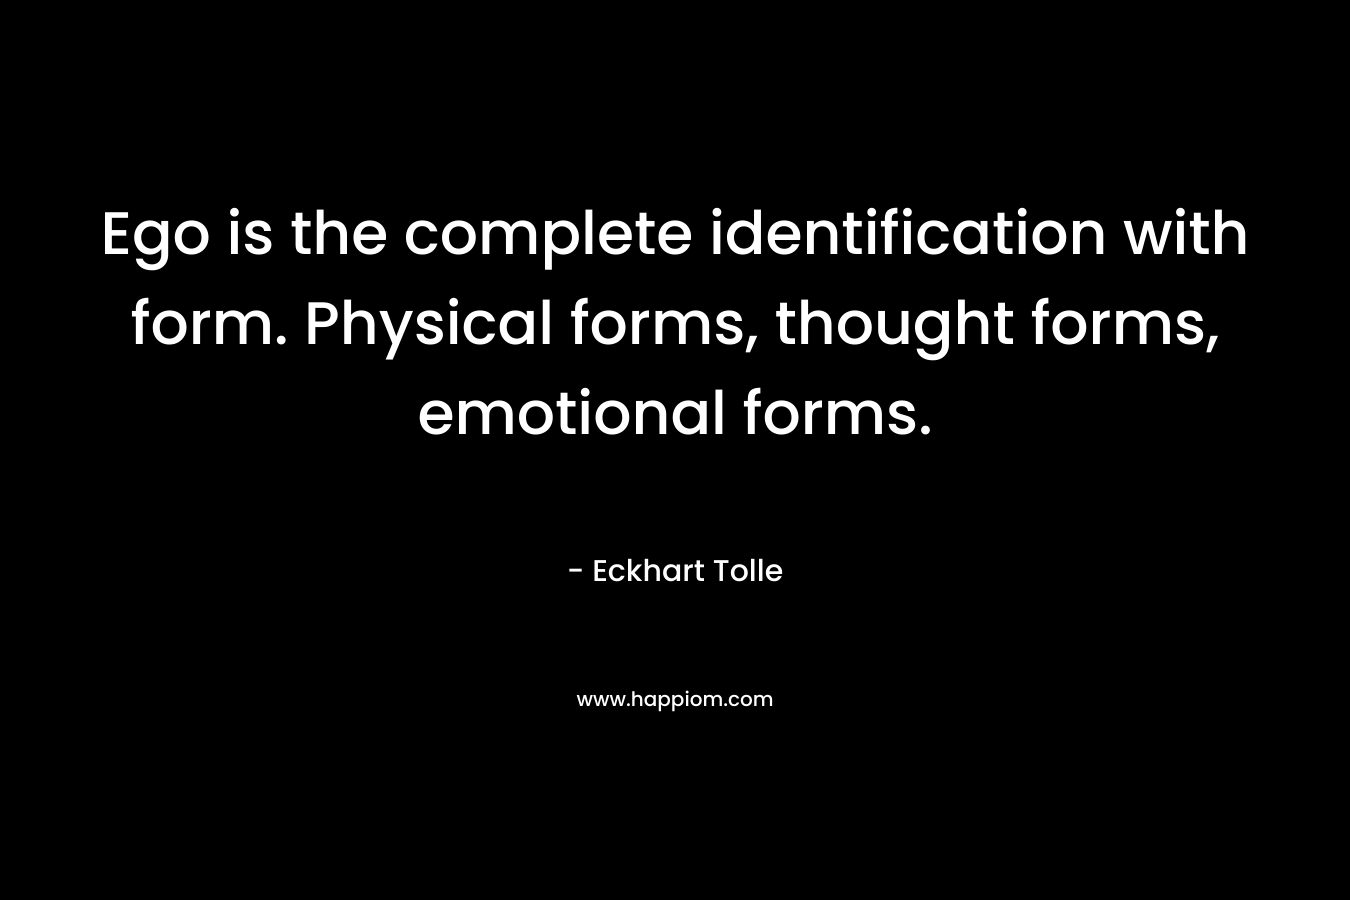 Ego is the complete identification with form. Physical forms, thought forms, emotional forms.